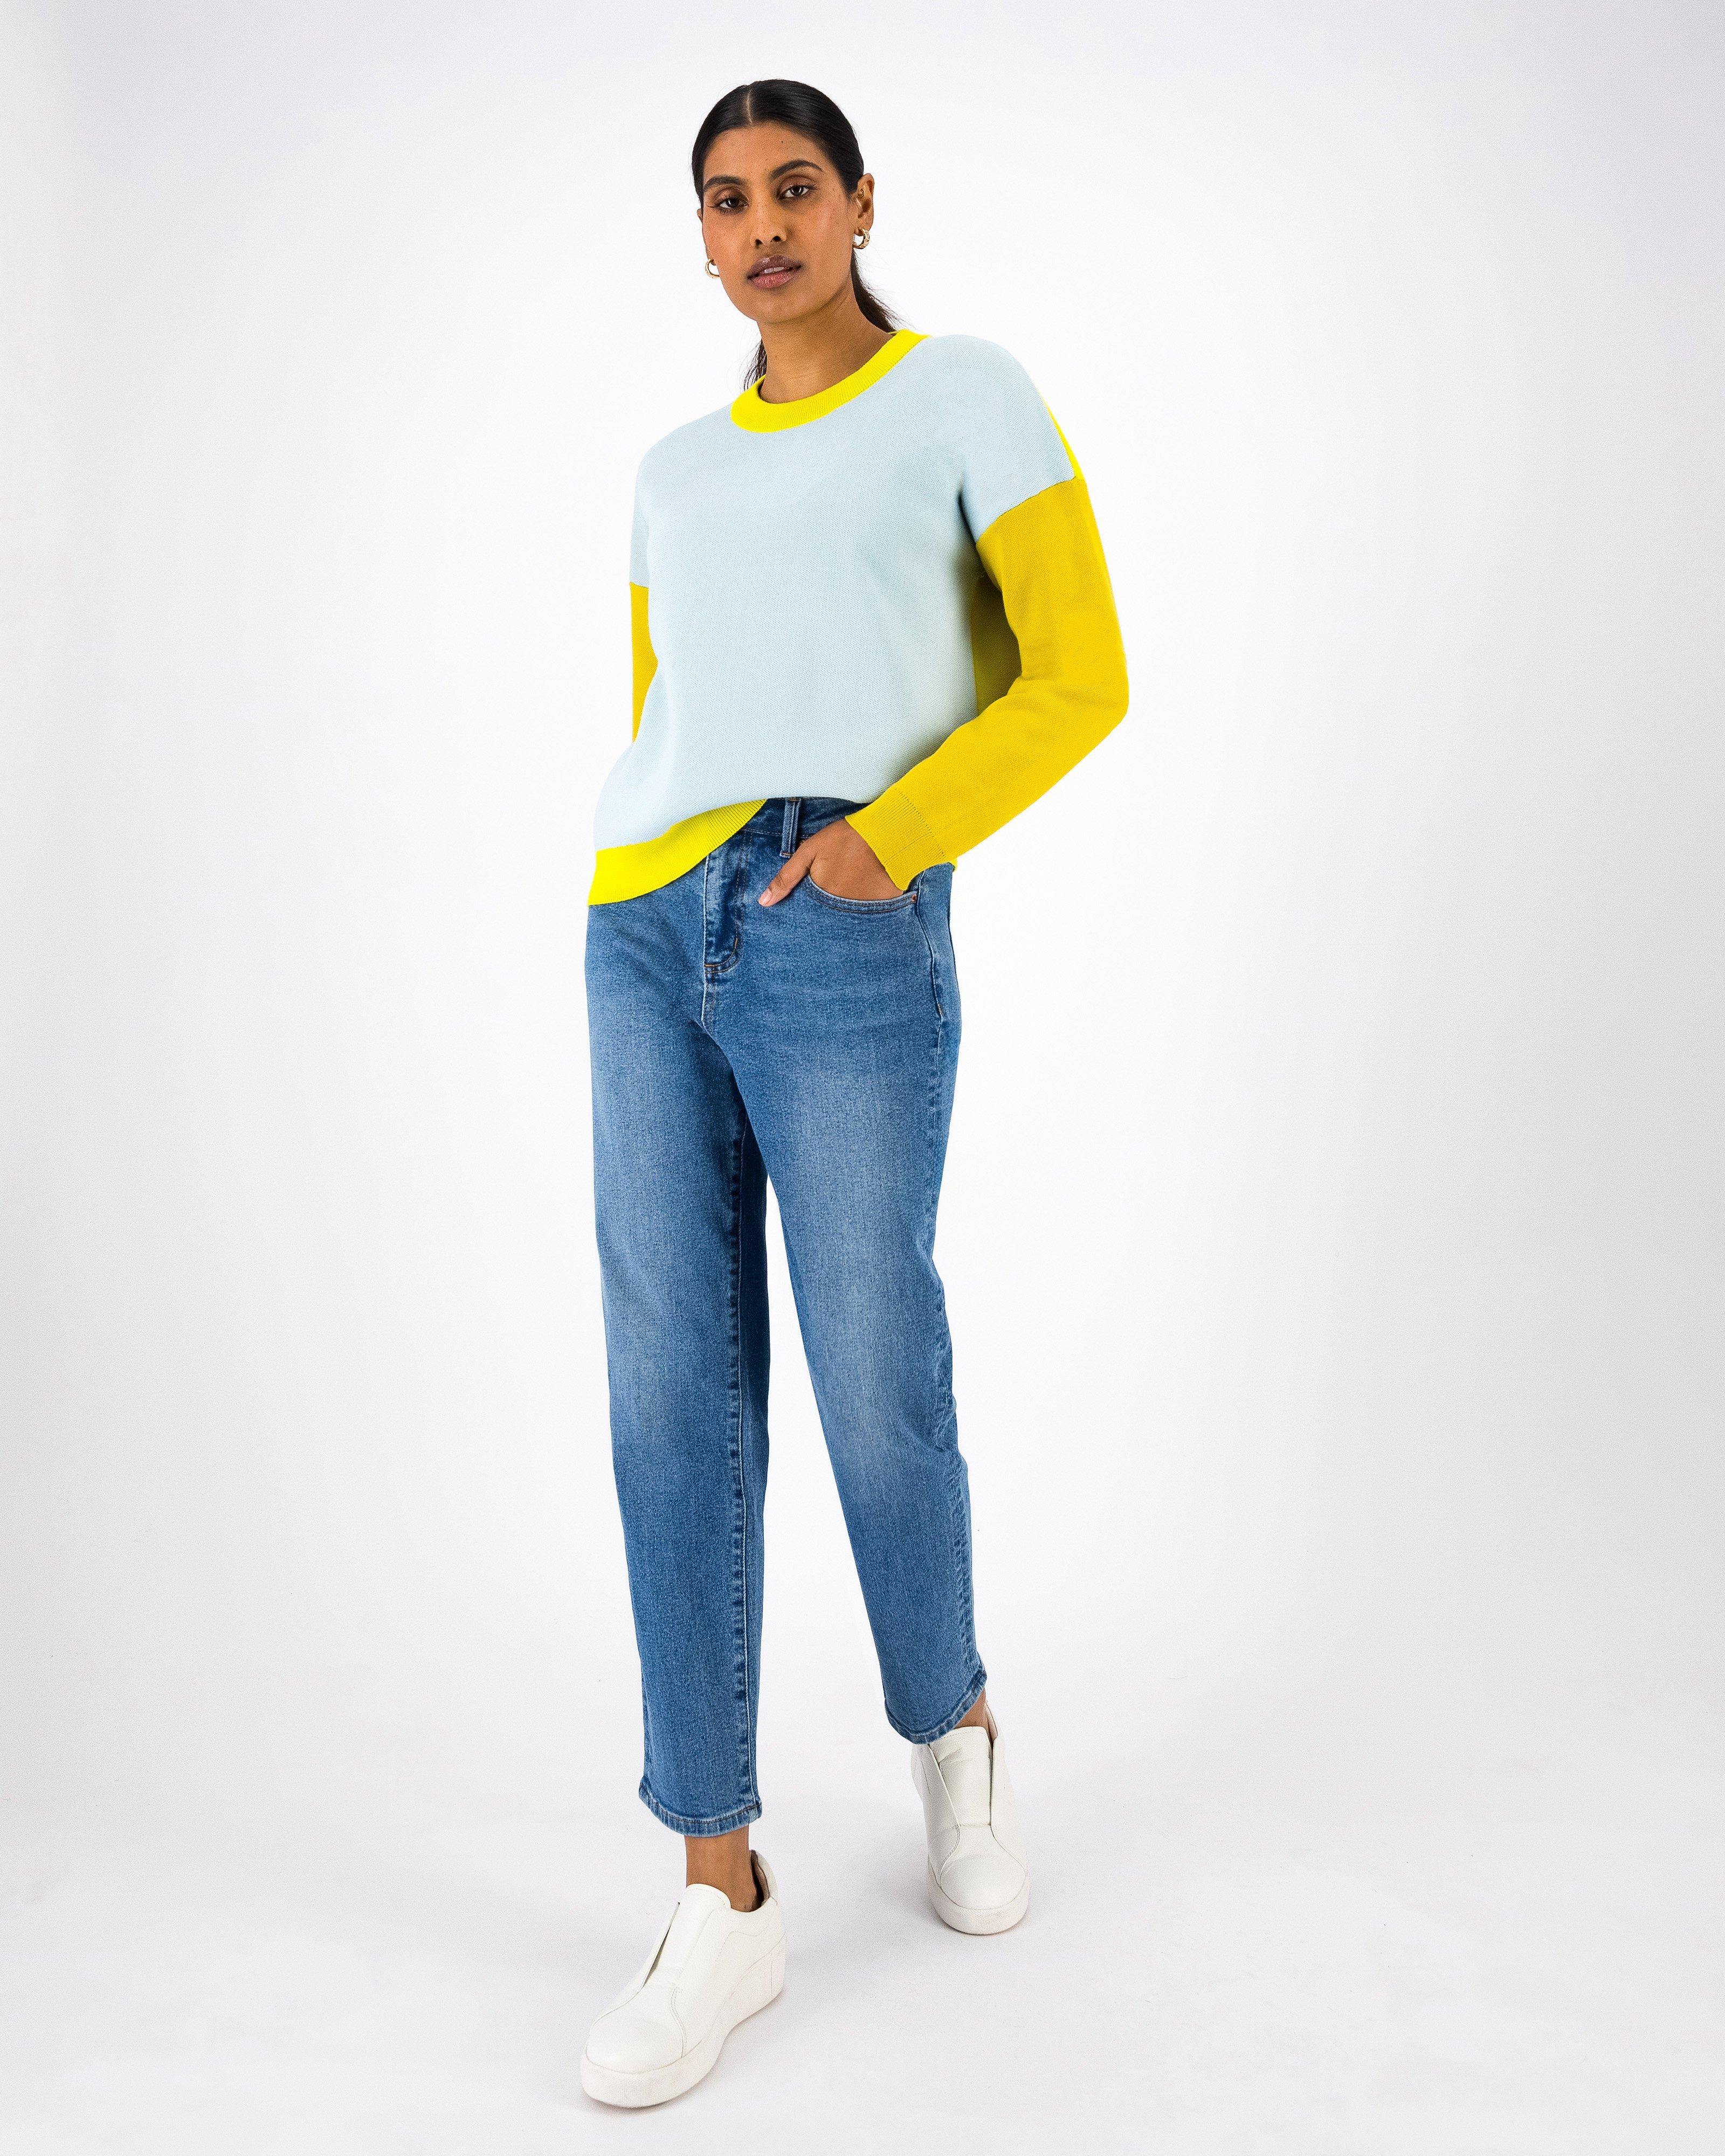 Tory Embroidered Knit -  Yellow